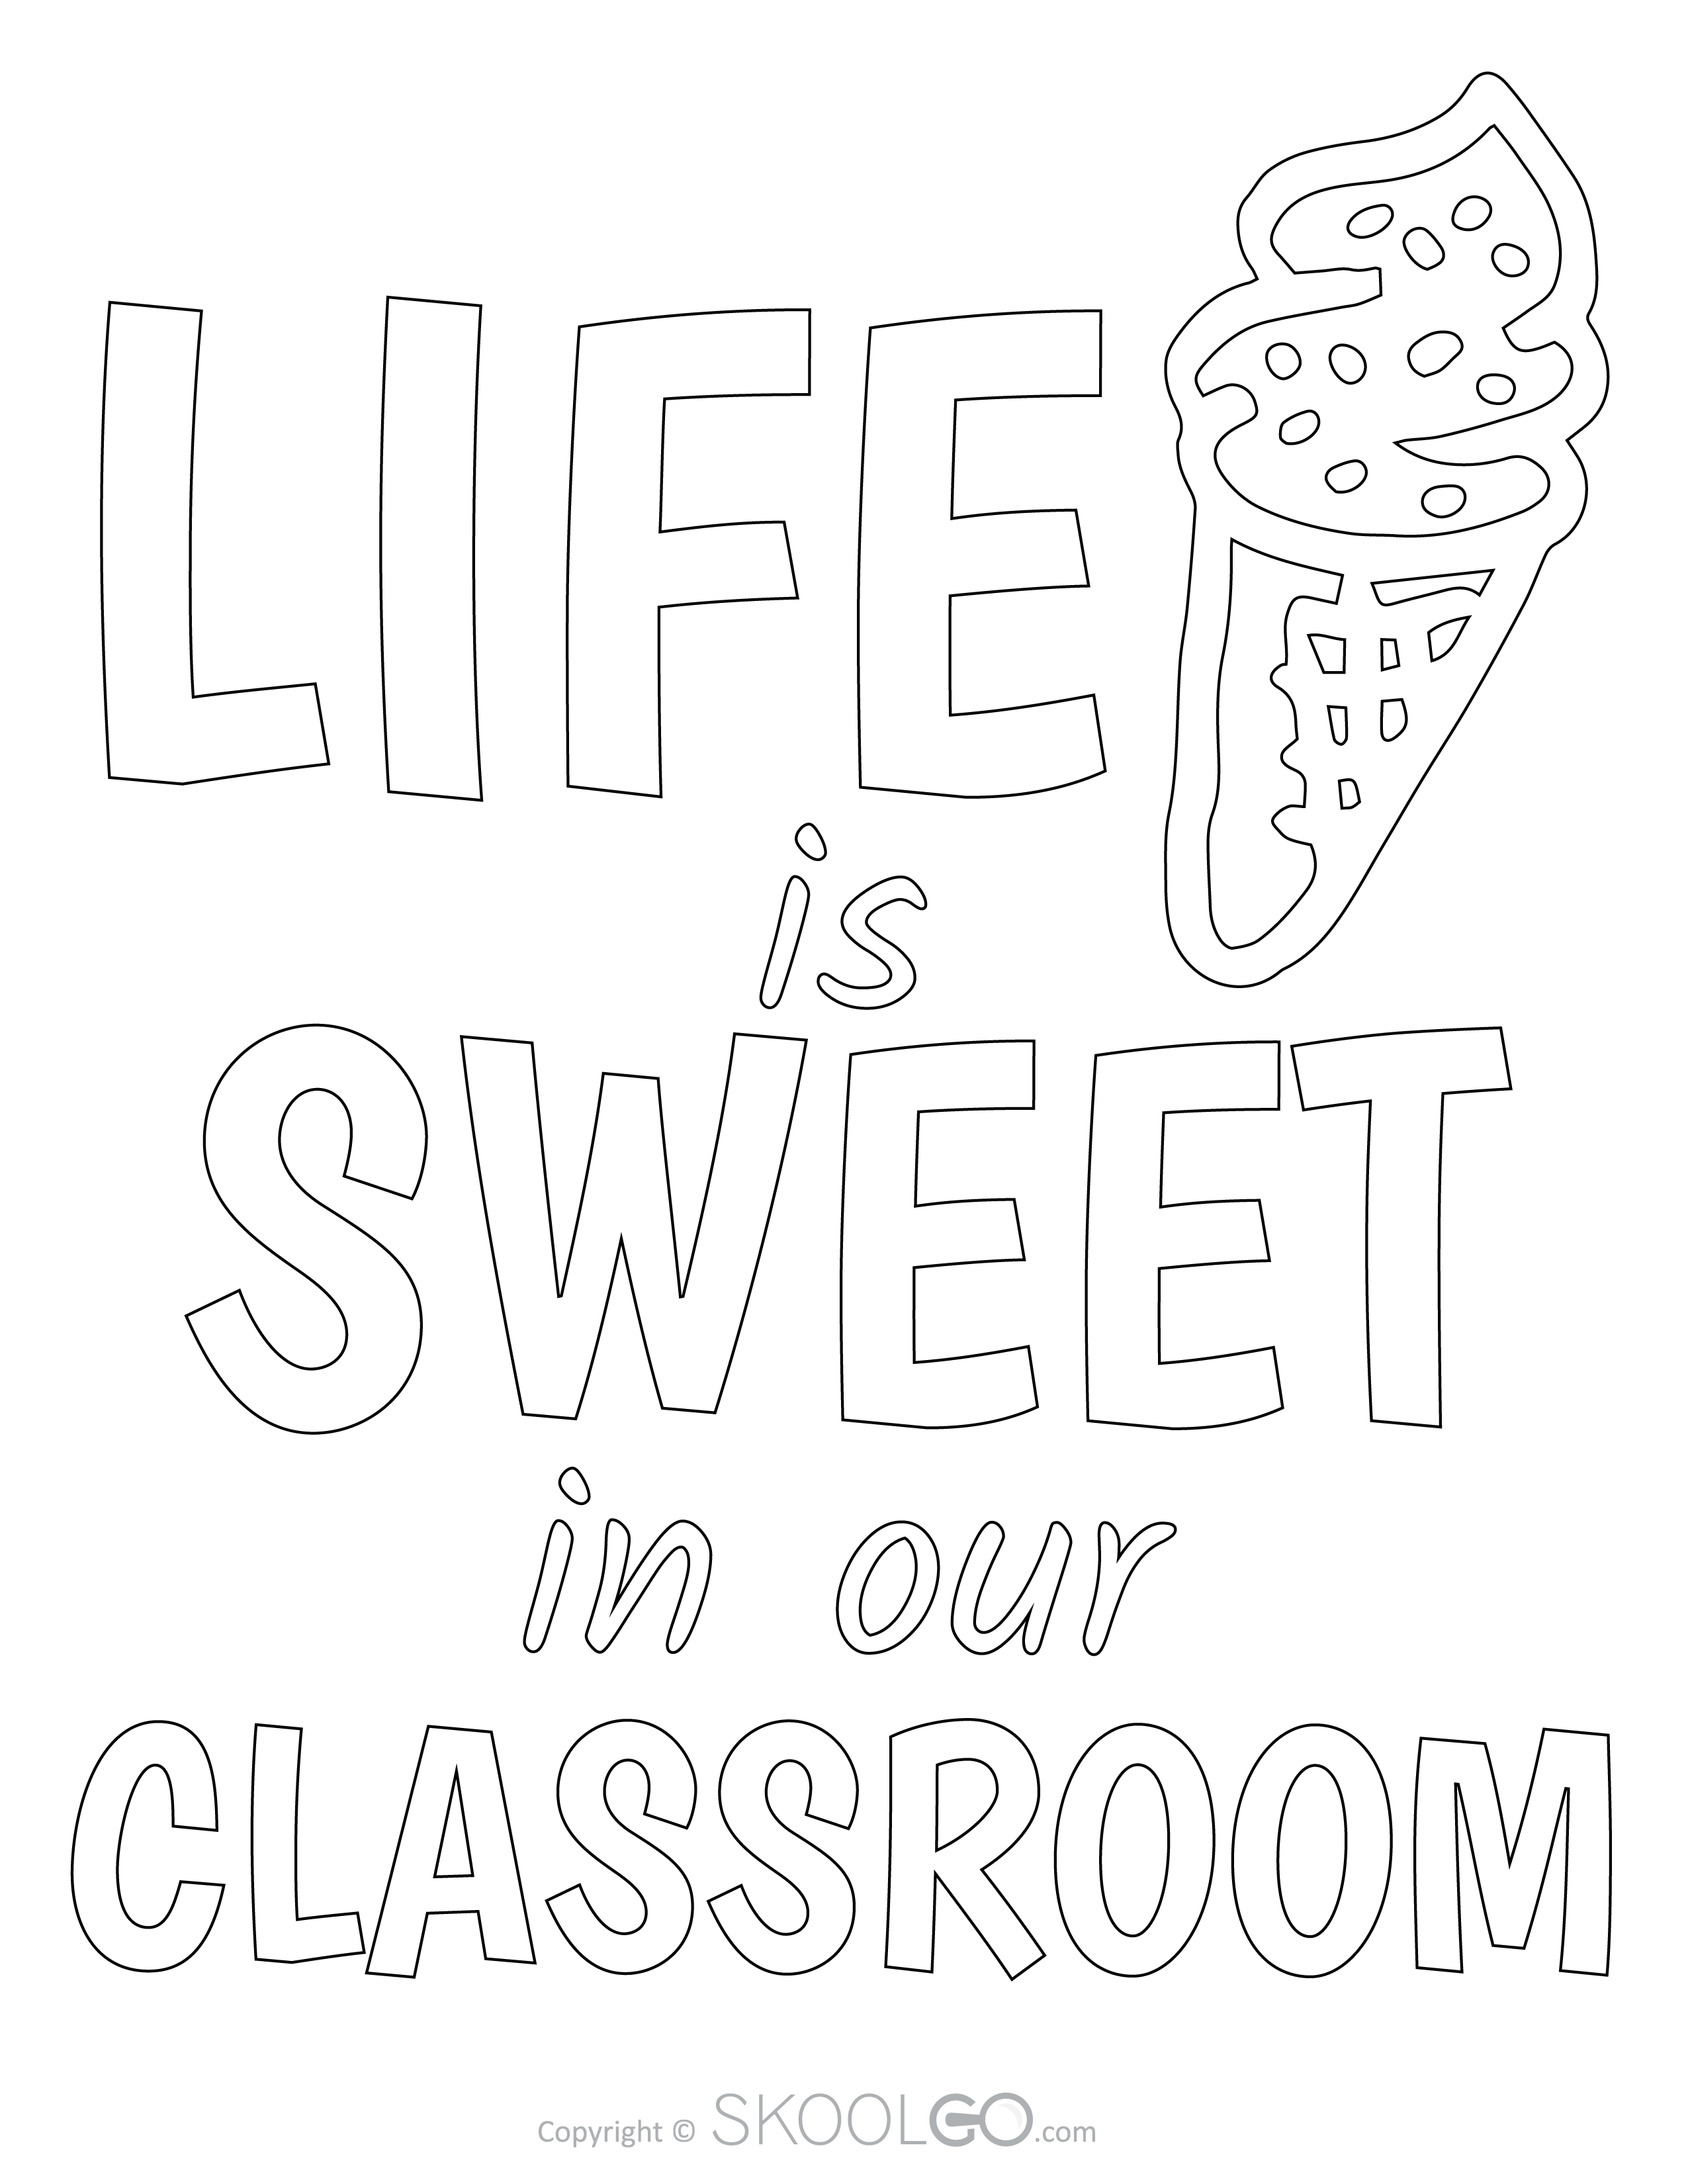 Life Is Sweet In Our Classroom - Free Classroom Poster Coloring Version